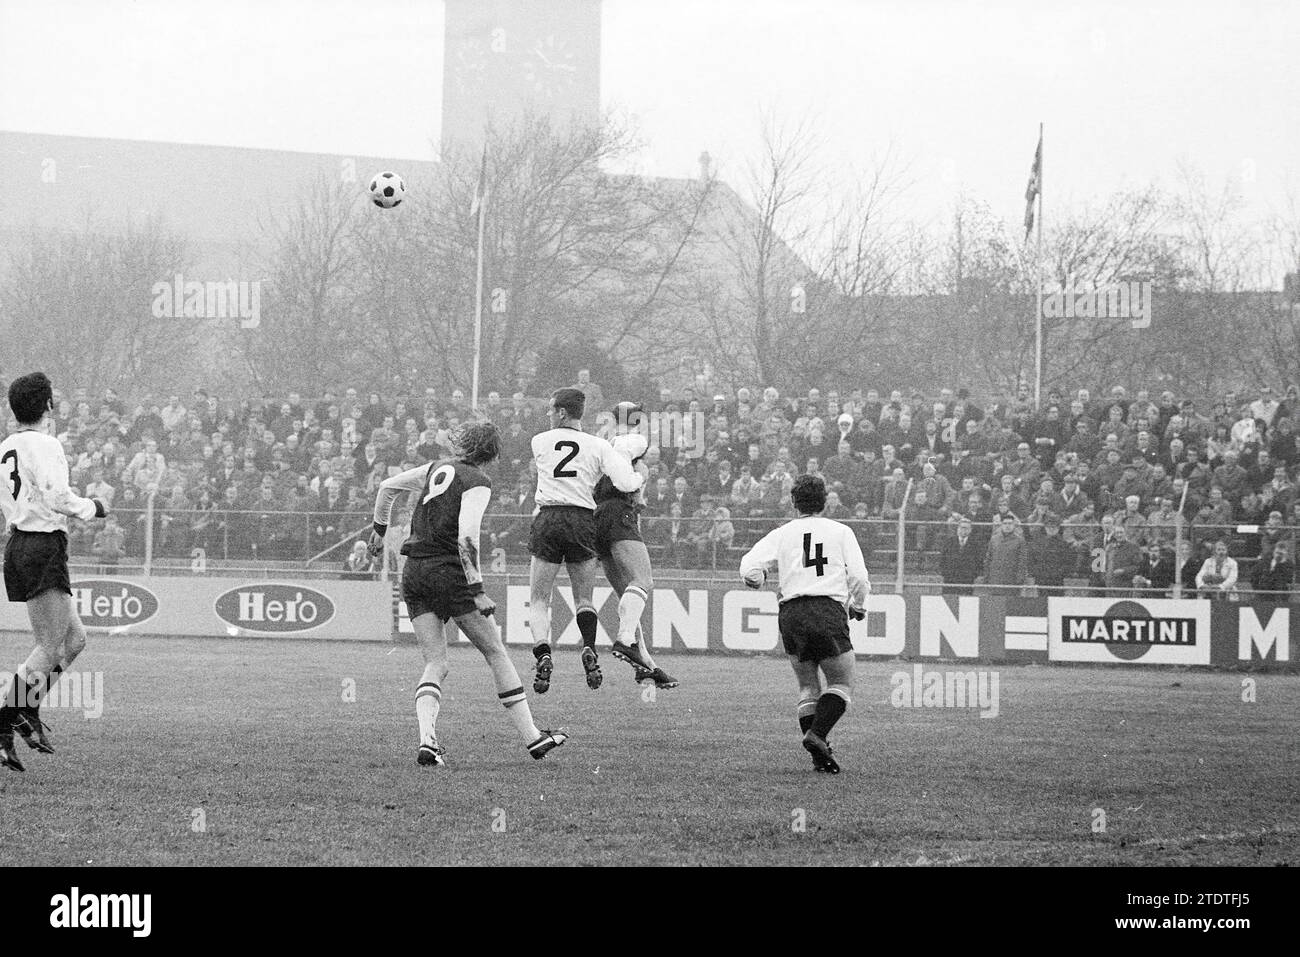 Haarlem - NAC, Football Haarlem, 22-11-1970, Whizgle News from the Past, Tailored for the Future. Explore historical narratives, Dutch The Netherlands agency image with a modern perspective, bridging the gap between yesterday's events and tomorrow's insights. A timeless journey shaping the stories that shape our future Stock Photo